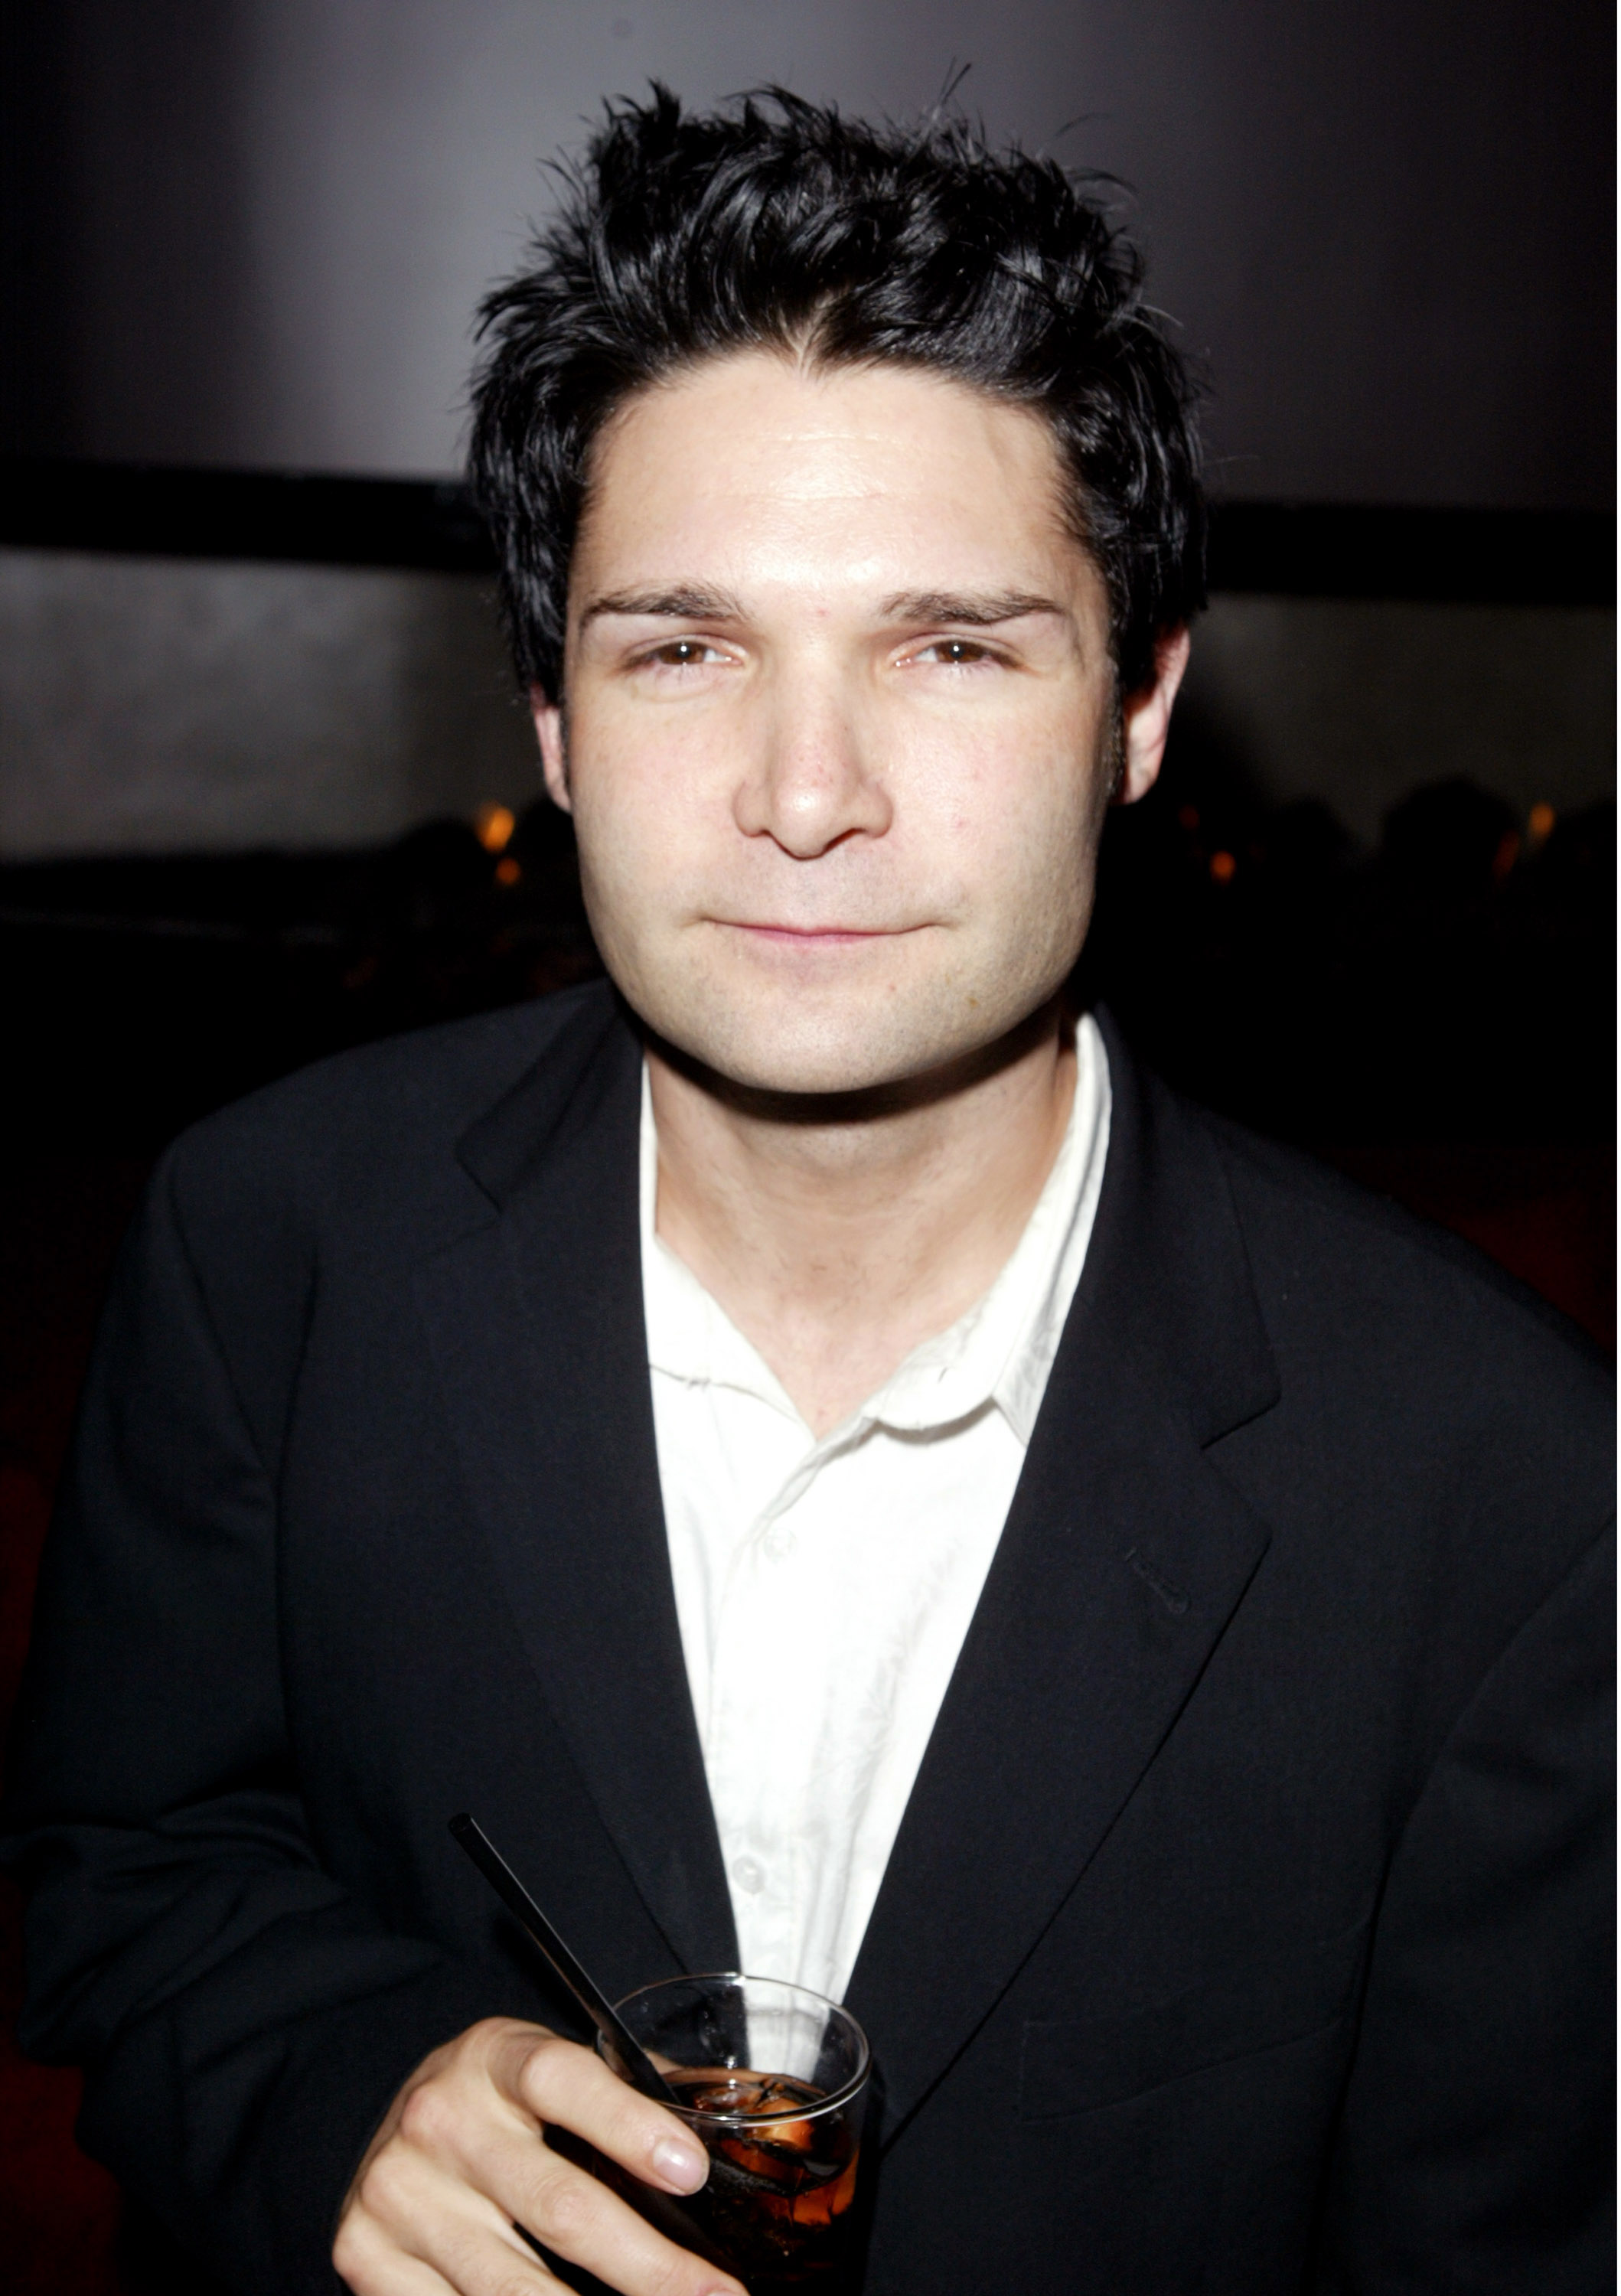 Corey Feldman during The Hollywood Reporter's 11th Annual Next Generation party on November 9, 2004 in Hollywood, California. | Source: Getty Images